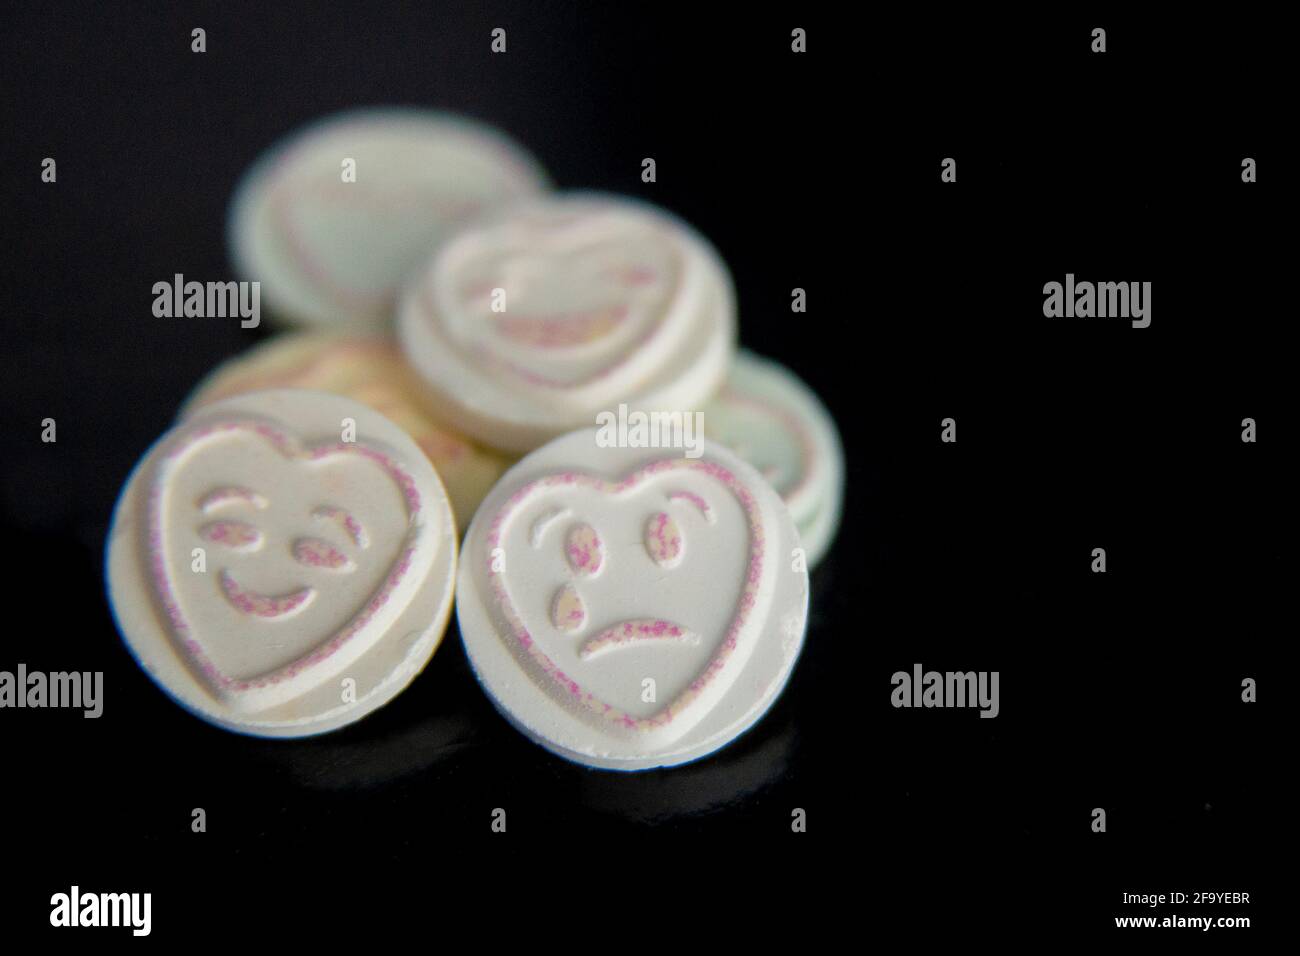 Love heart sweet emojis emoticons on black background, sad face and happy face. Focus on sad face. Mental health, depression, mental health awareness Stock Photo